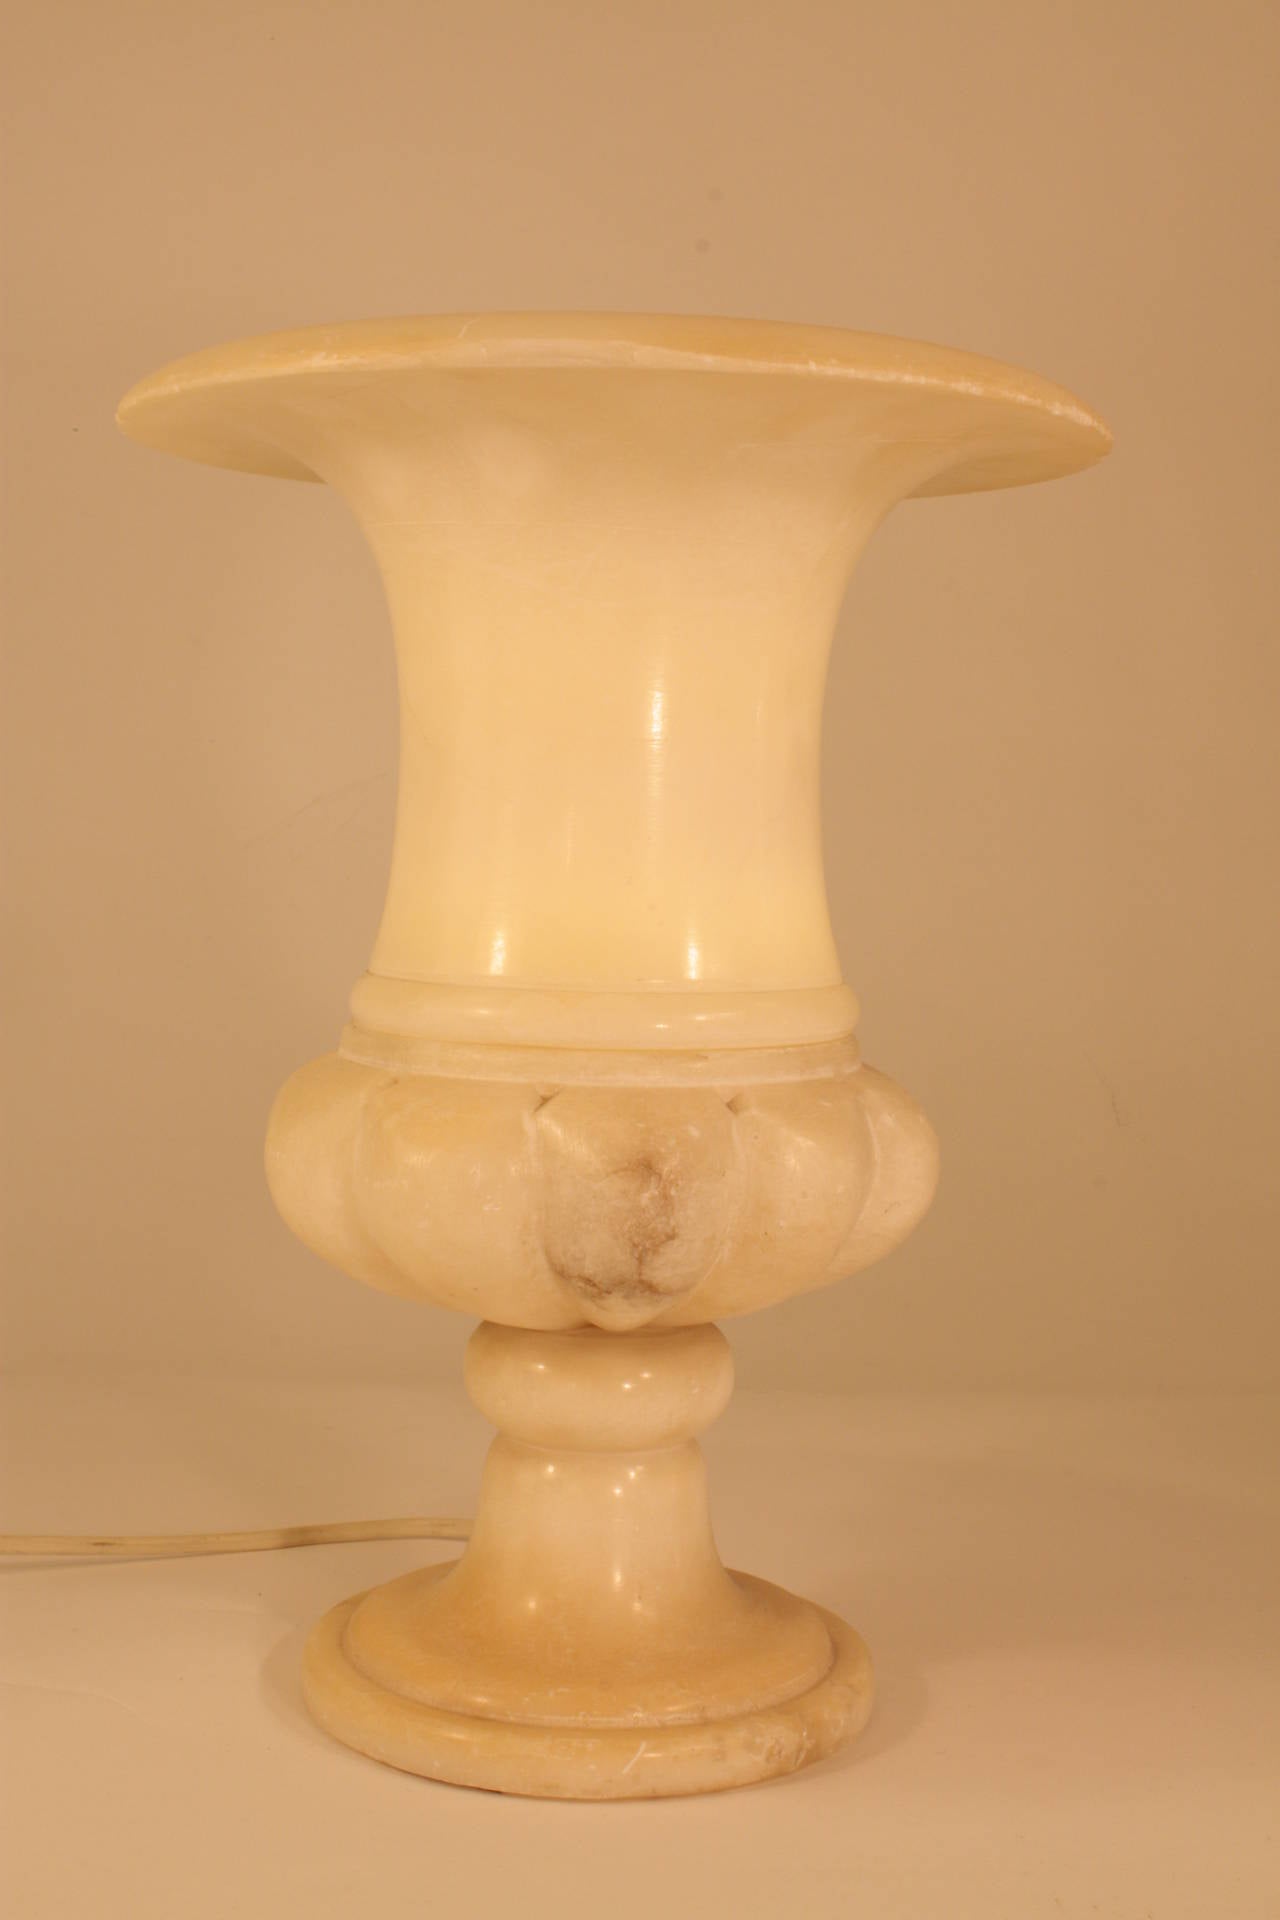 Gorgeous alabaster urn from the late deco period. Beautiful neoclassical design.